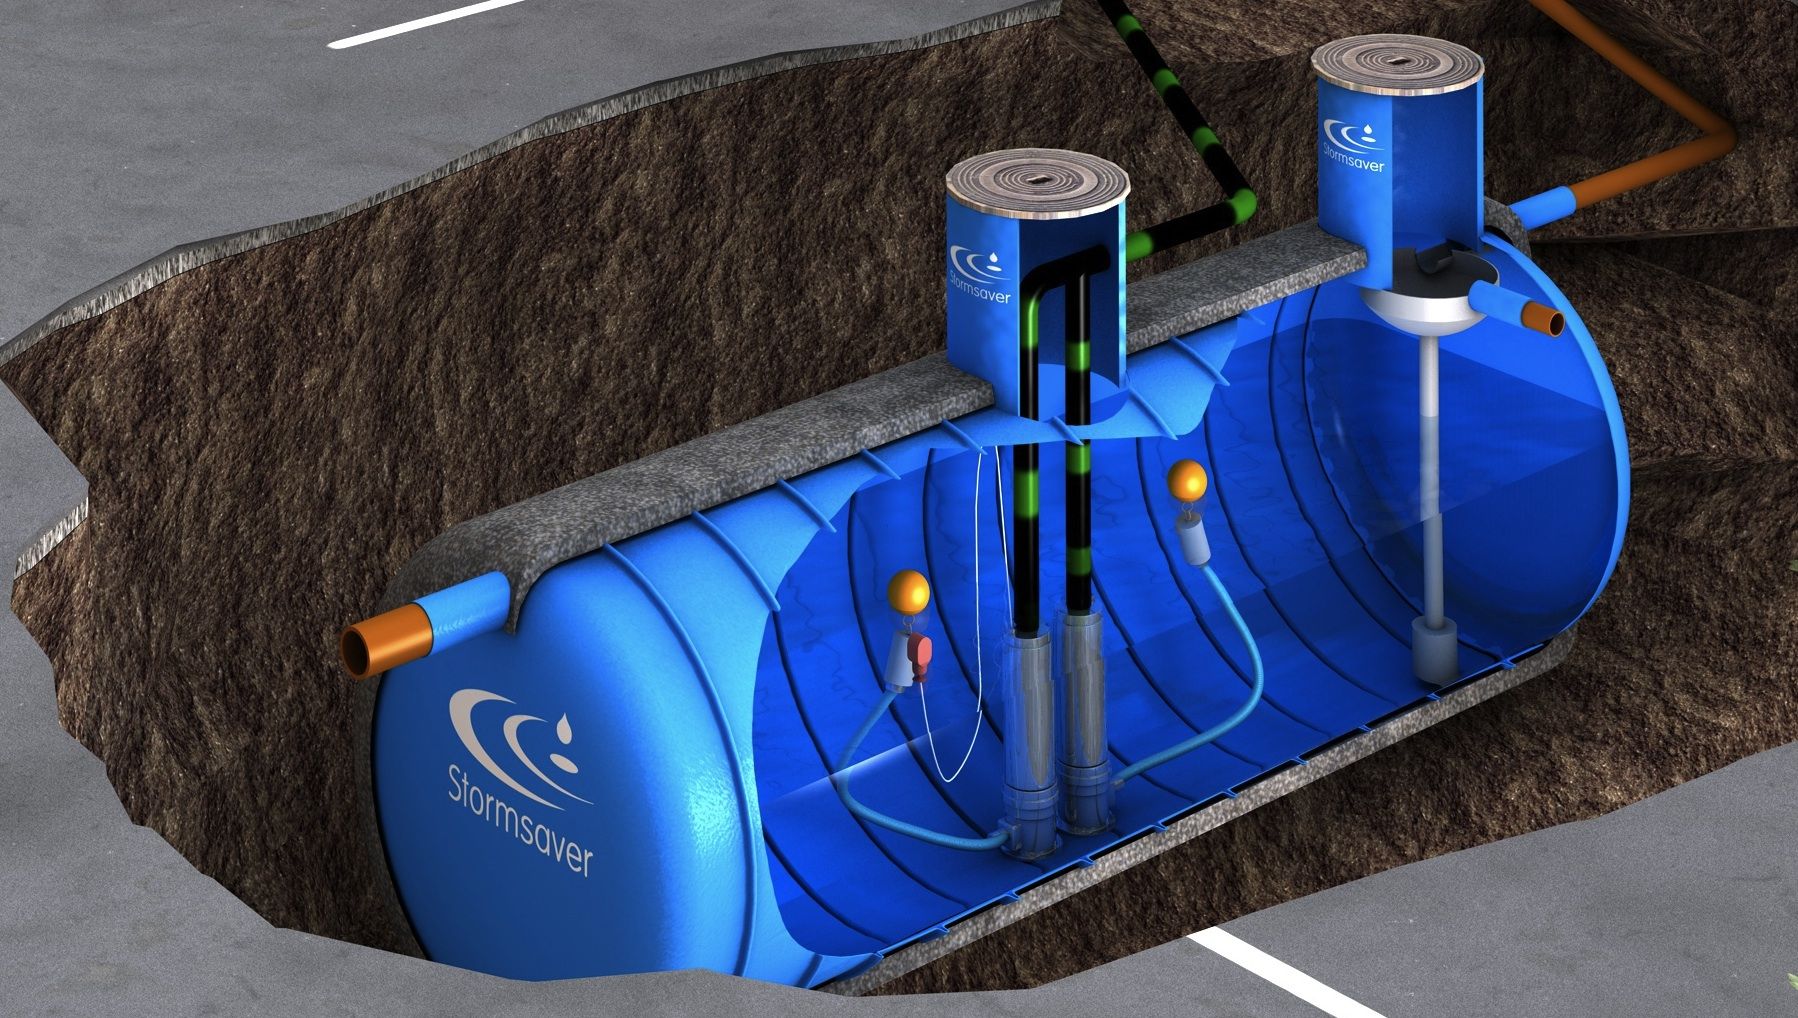 water-storage-tanks-types-and-basic-components-engineering-feed